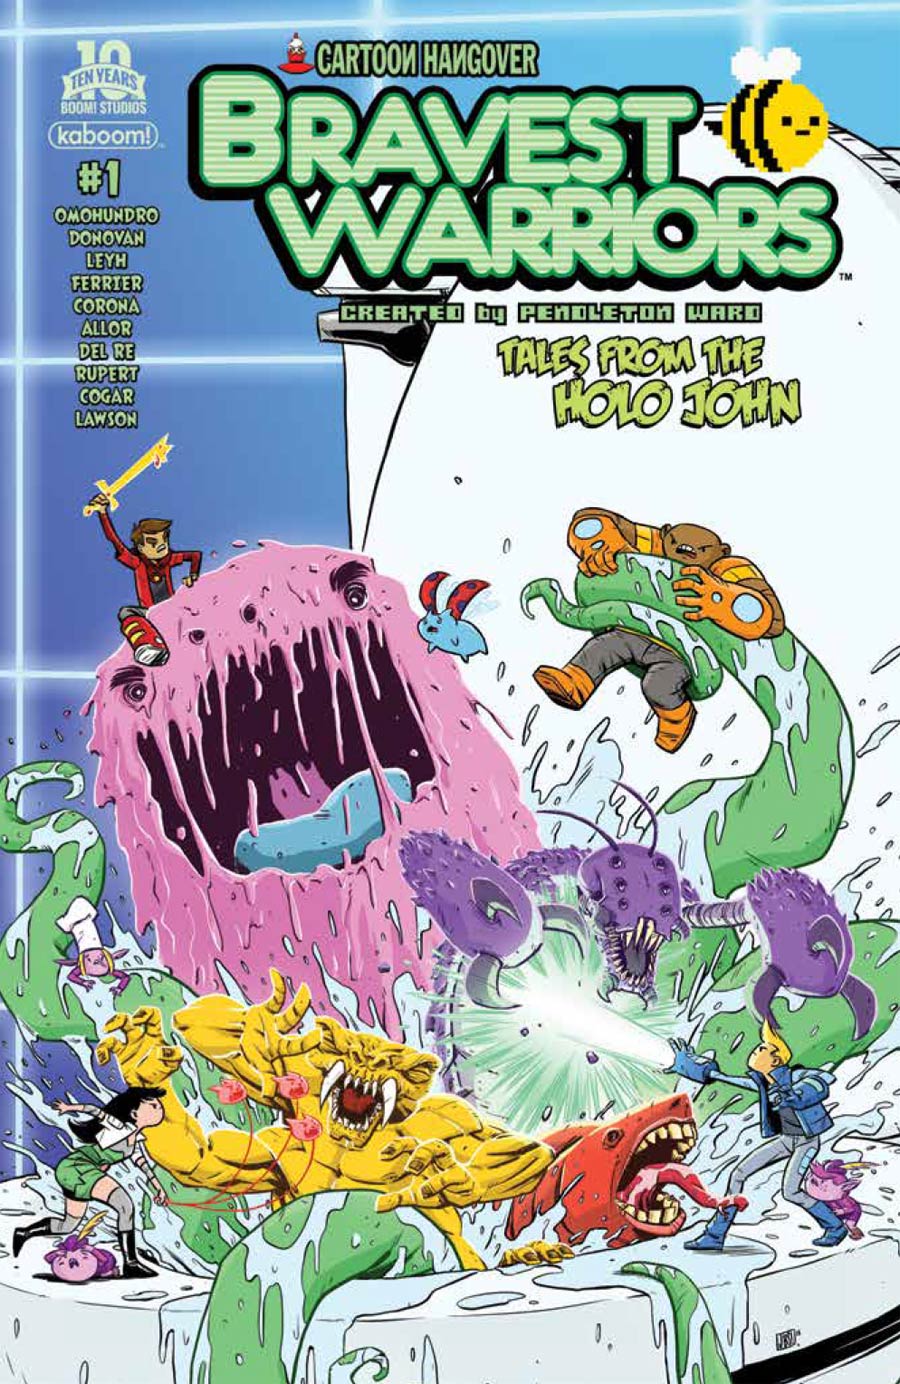 Bravest Warriors Tales From The Holo John #1 Cover A Regular Jonathan Brandon Sawyer Cover